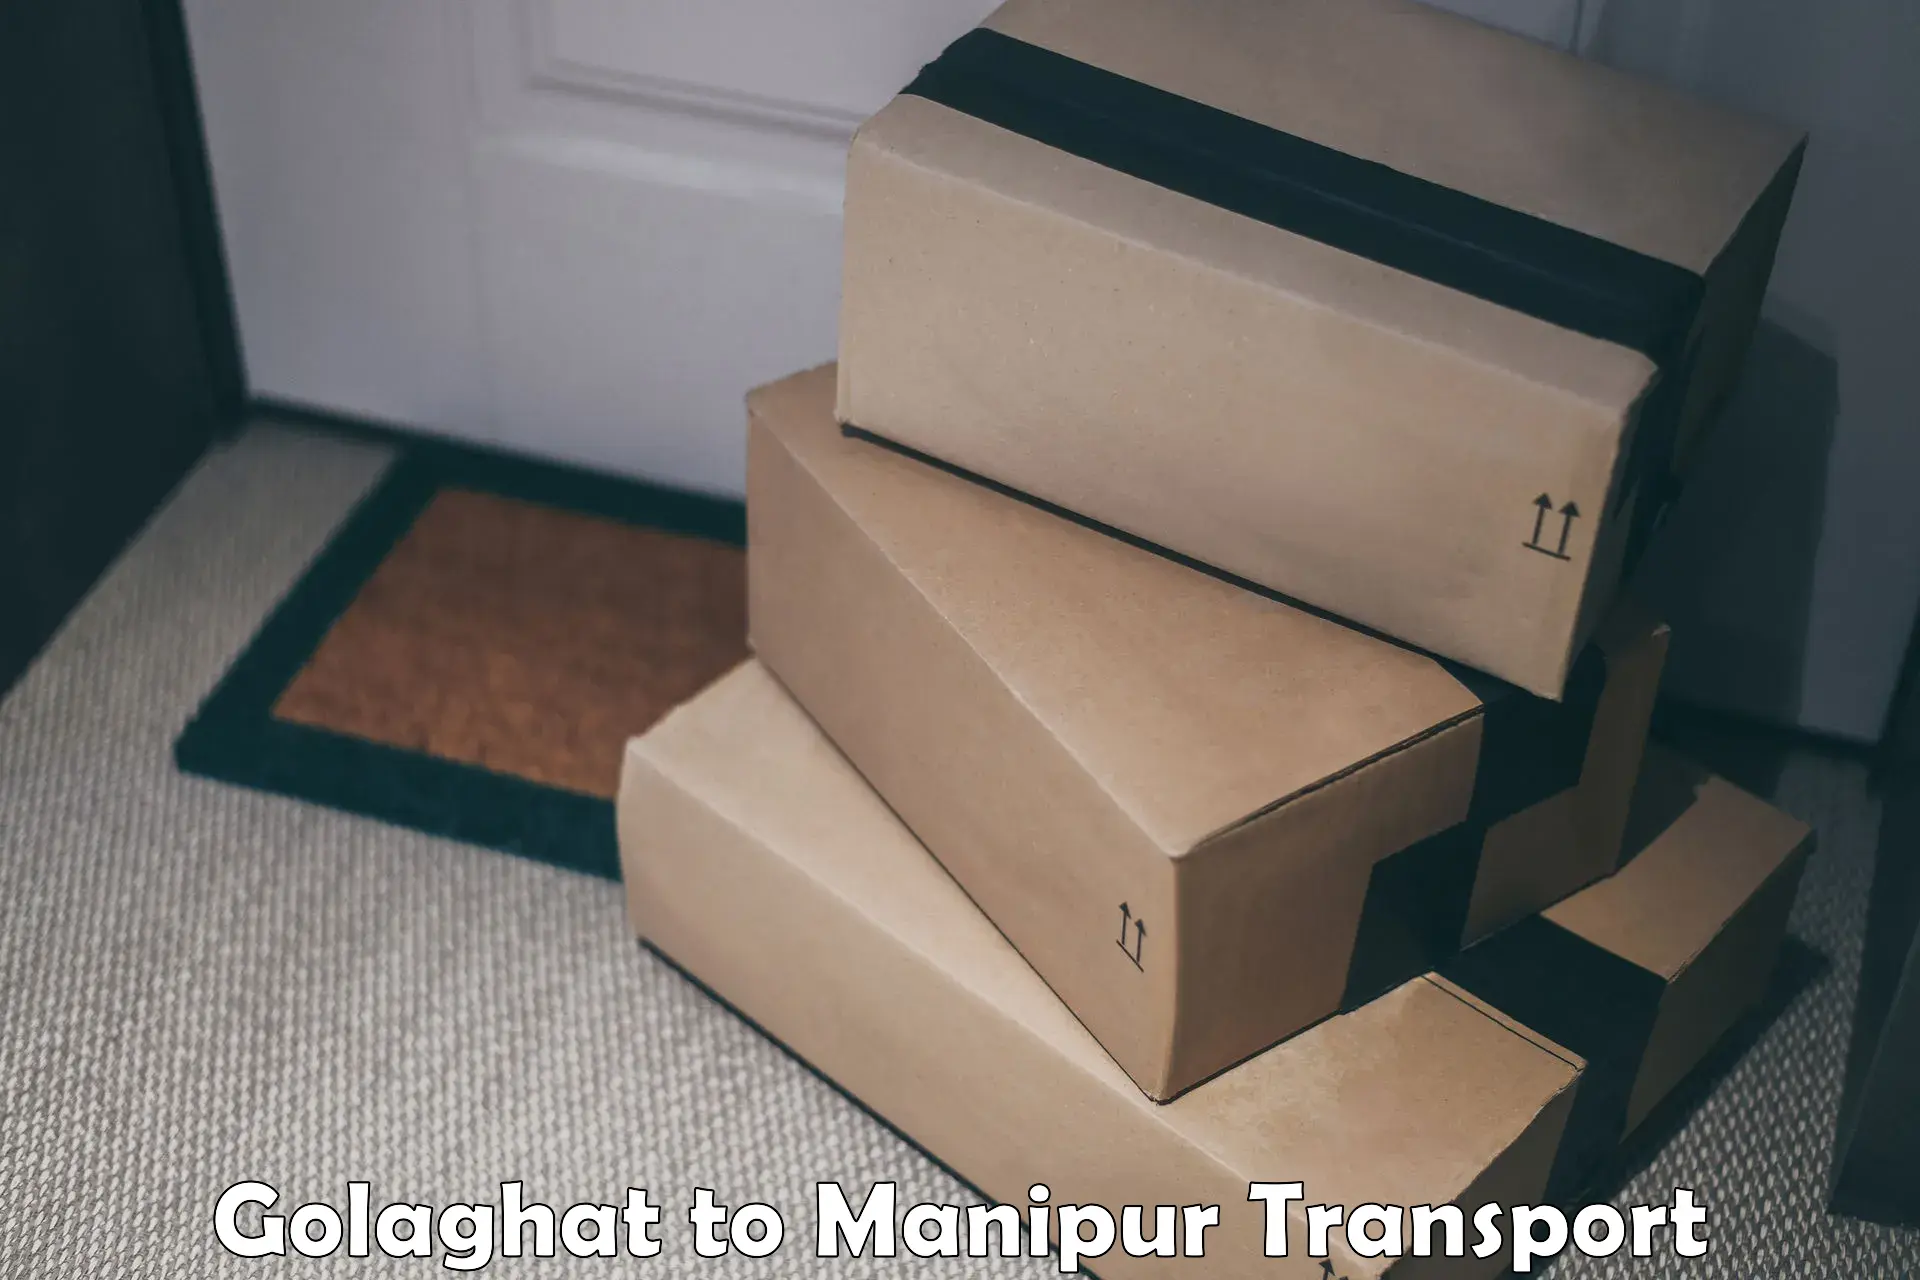 Shipping partner Golaghat to Thoubal